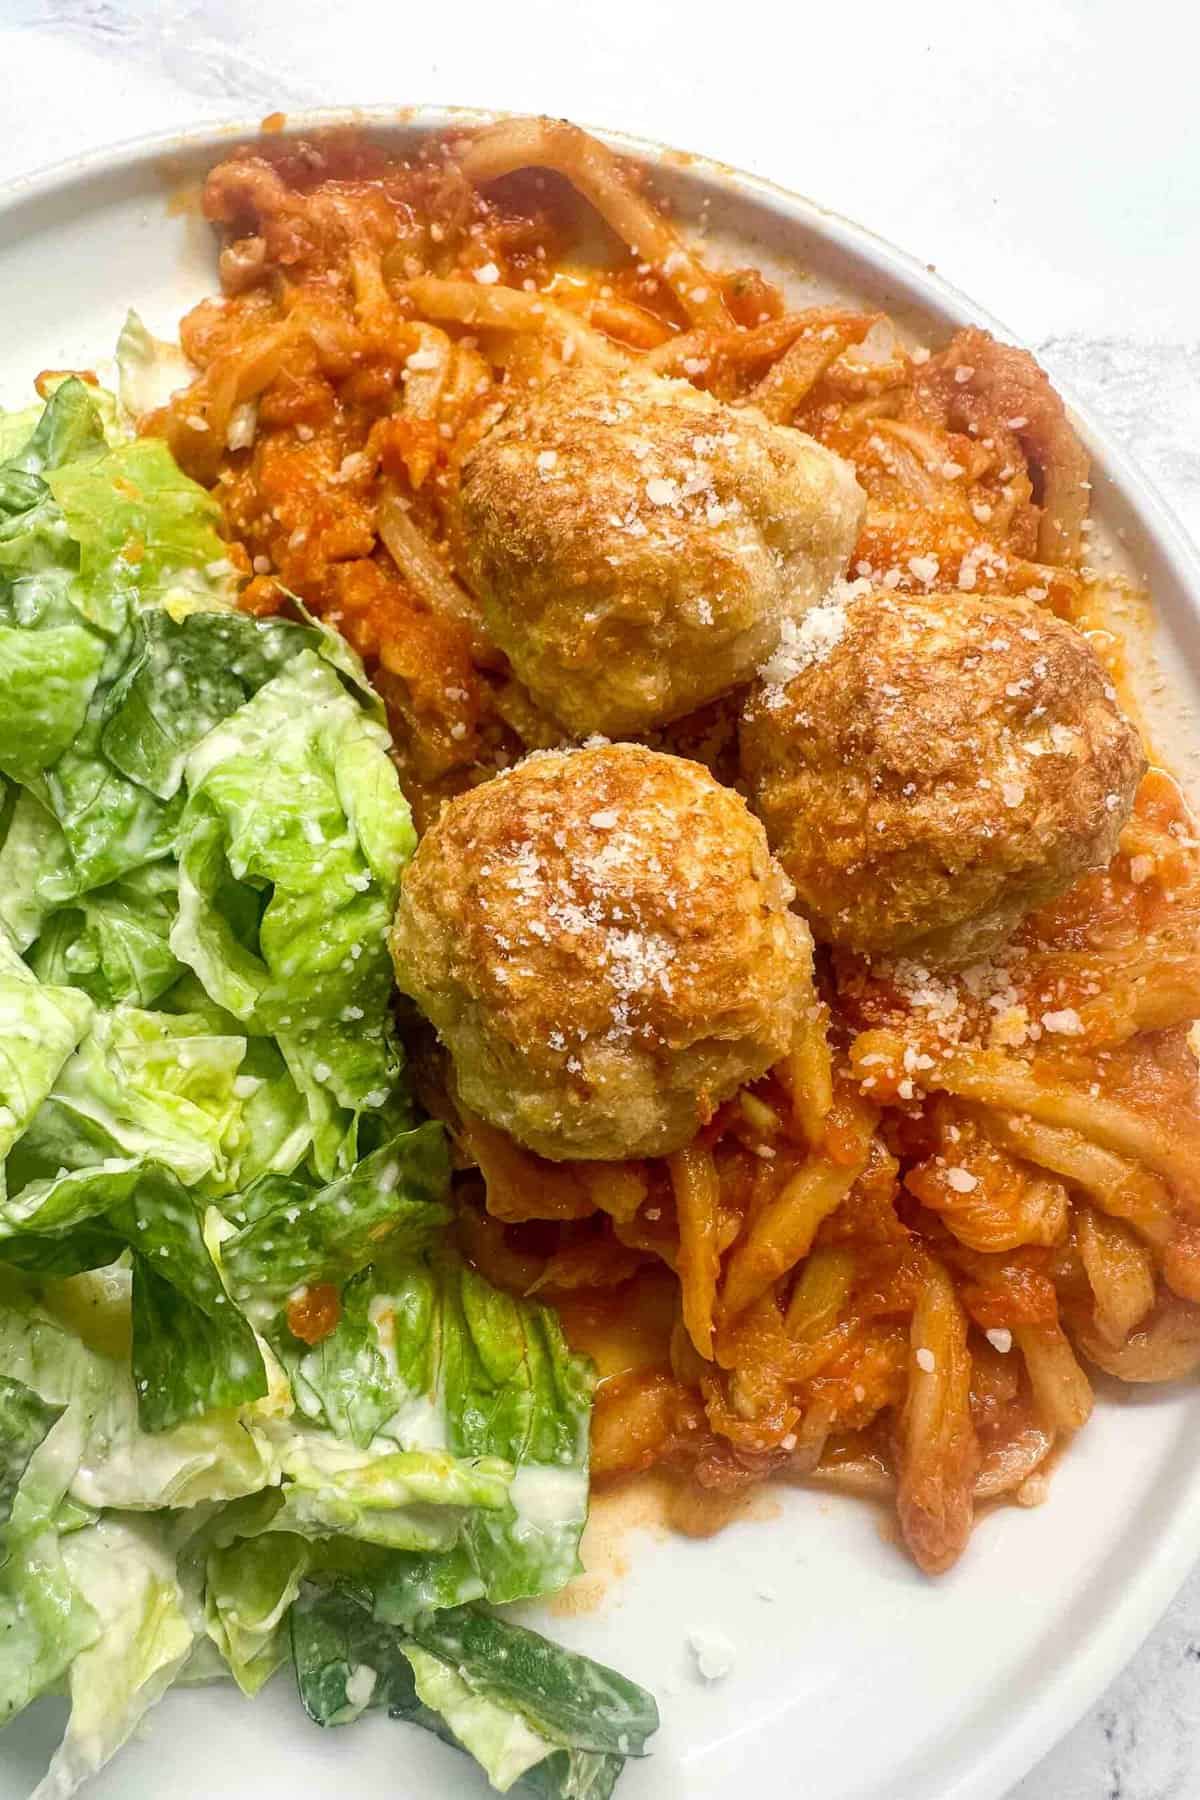 keto chicken meatballs ob a plate with side dishes.